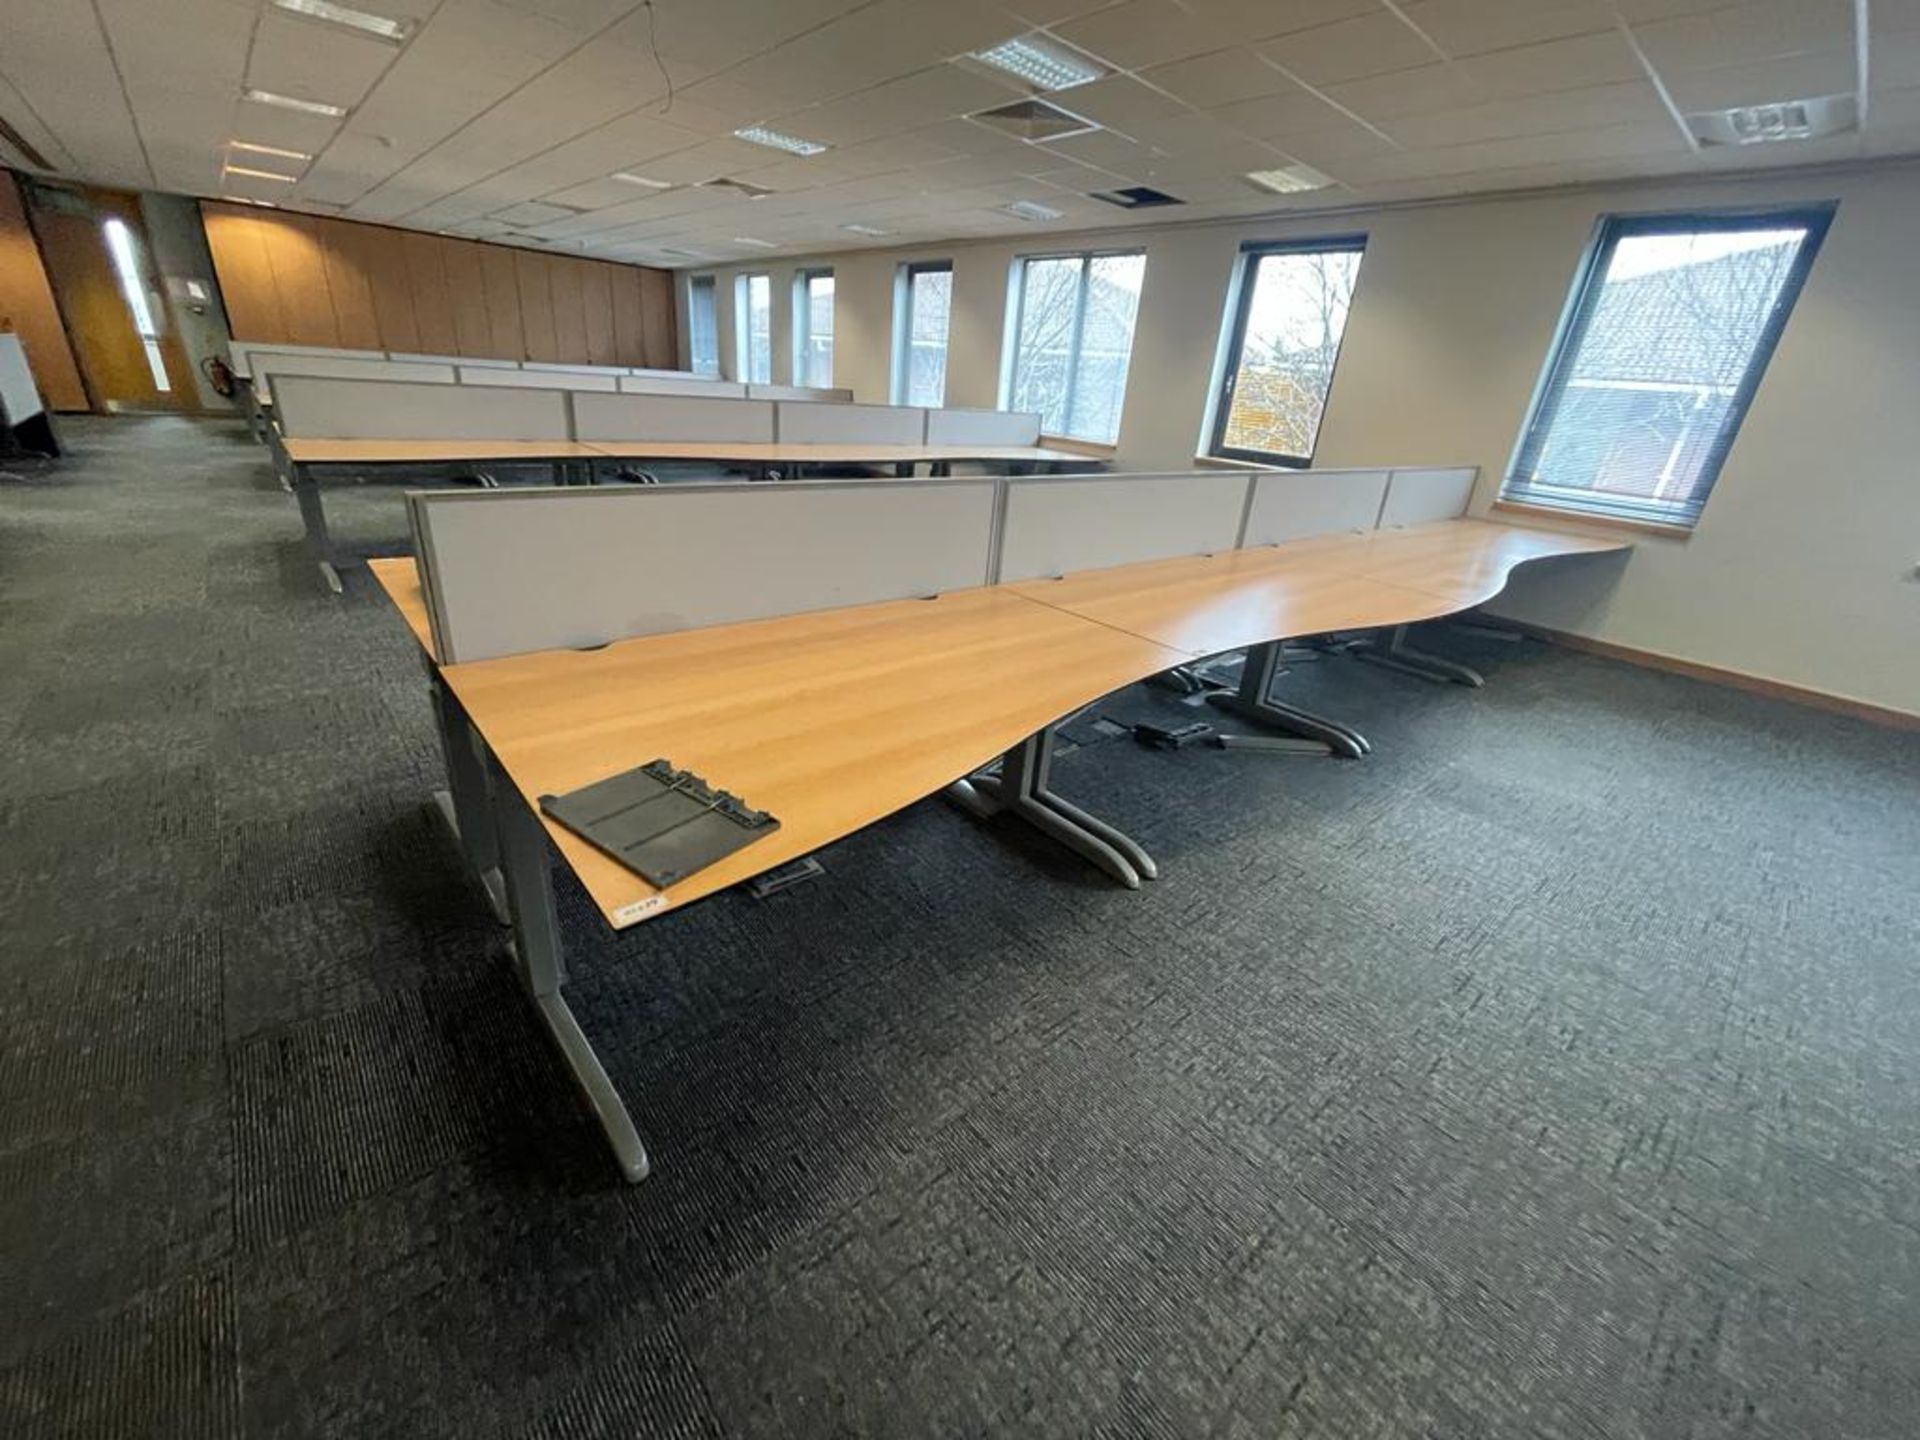 8 x Techo Wave Office Desks With Privacy Panels and Cable Tidy Cages - Beech Wood Finish - Image 20 of 20